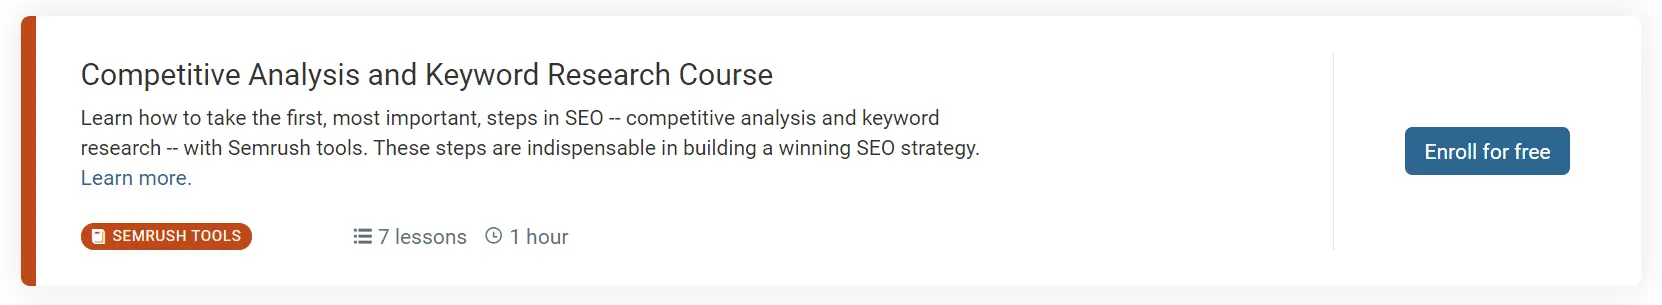 Competitive Analysis Course